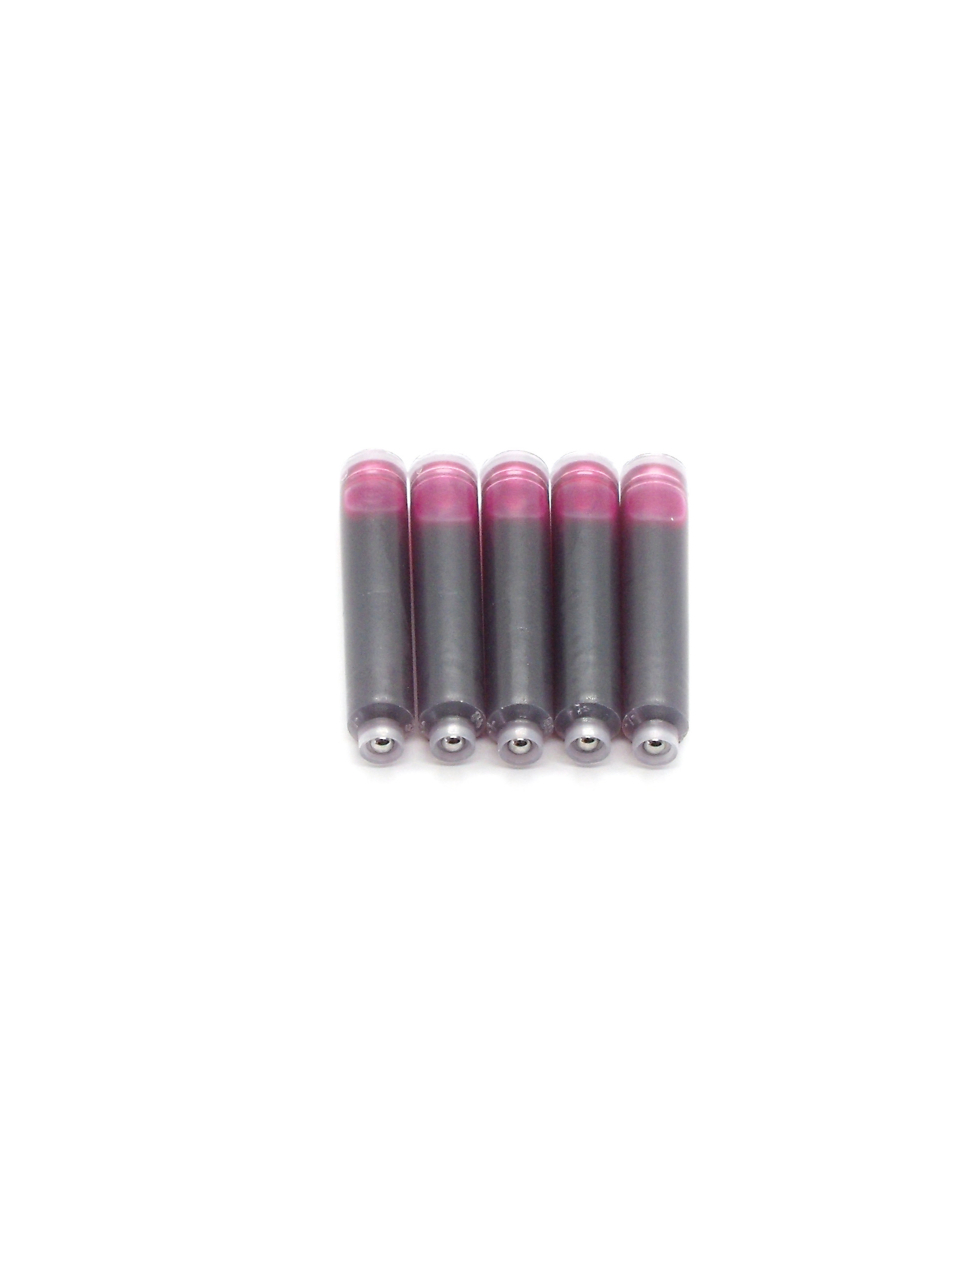 Top Ink Cartridges For Itoya Fountain Pens (Pink)